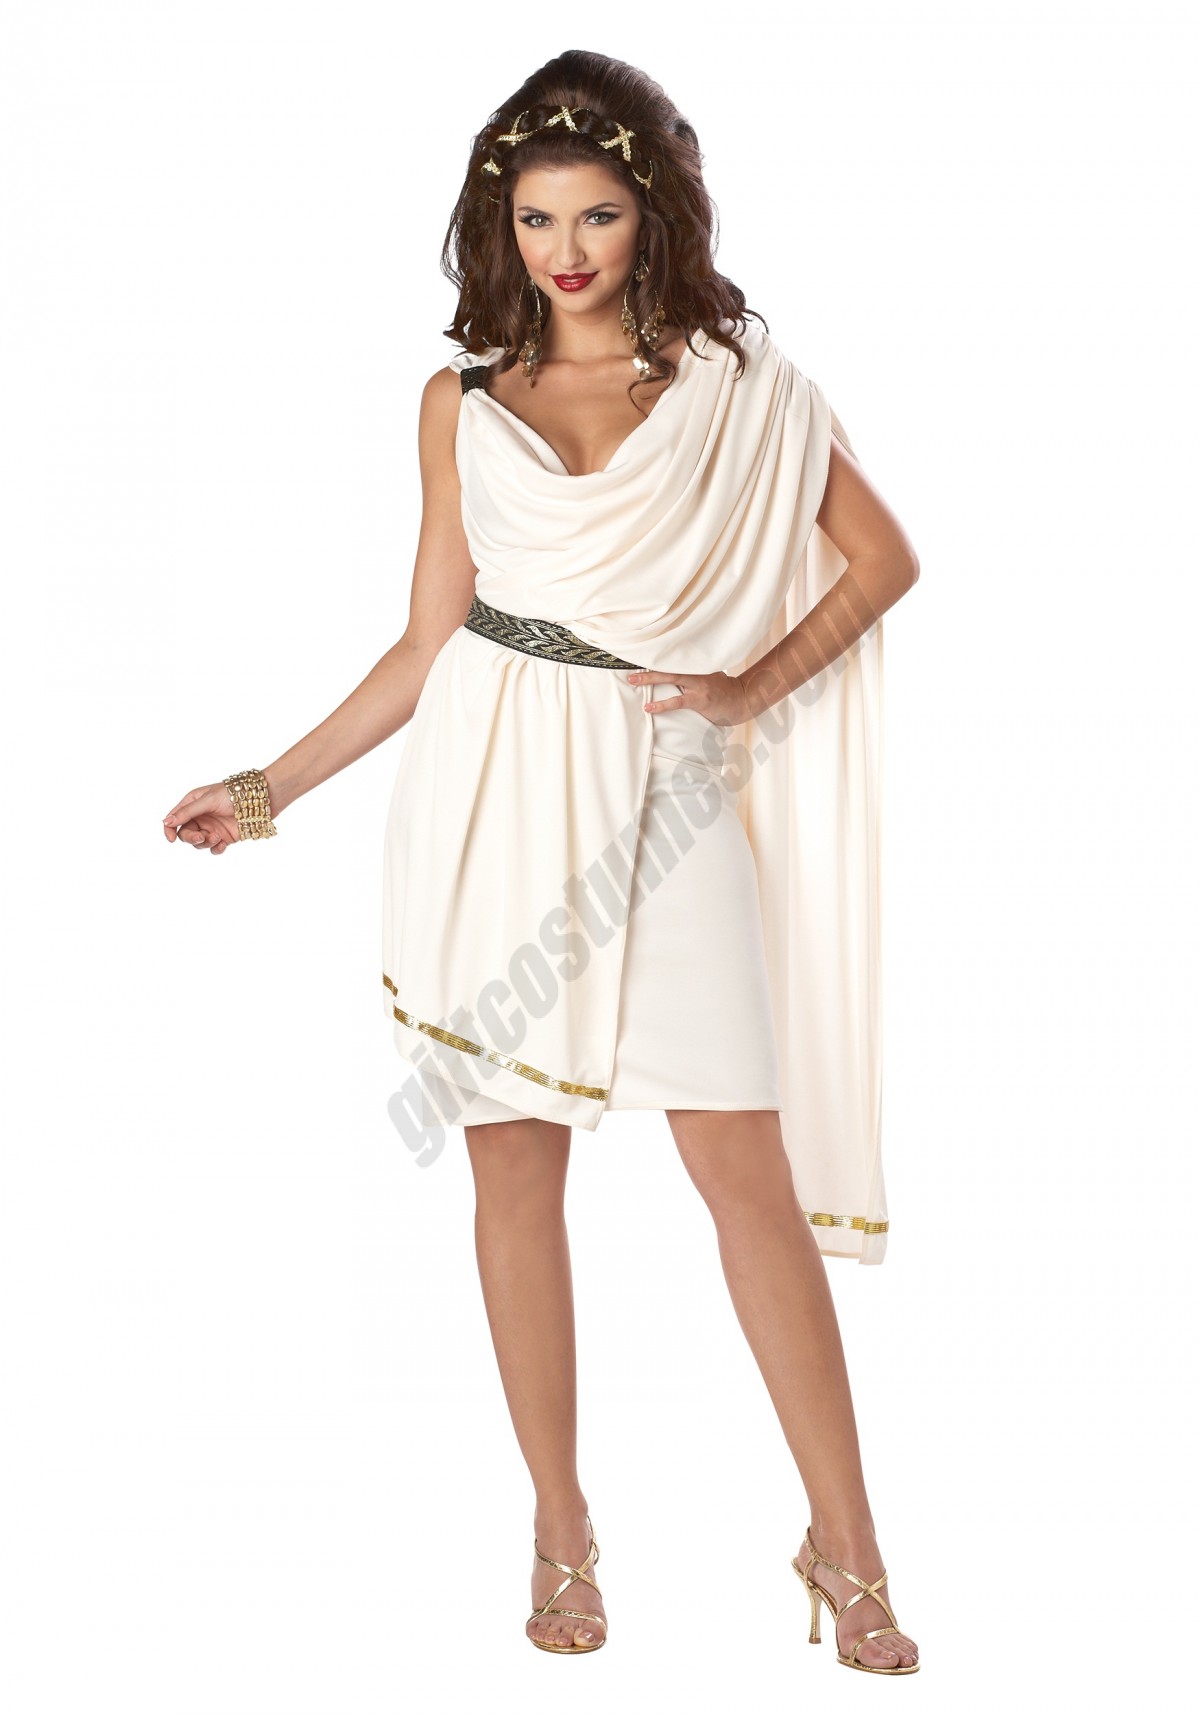 Women's Deluxe Classic Toga Costume Promotions - -0